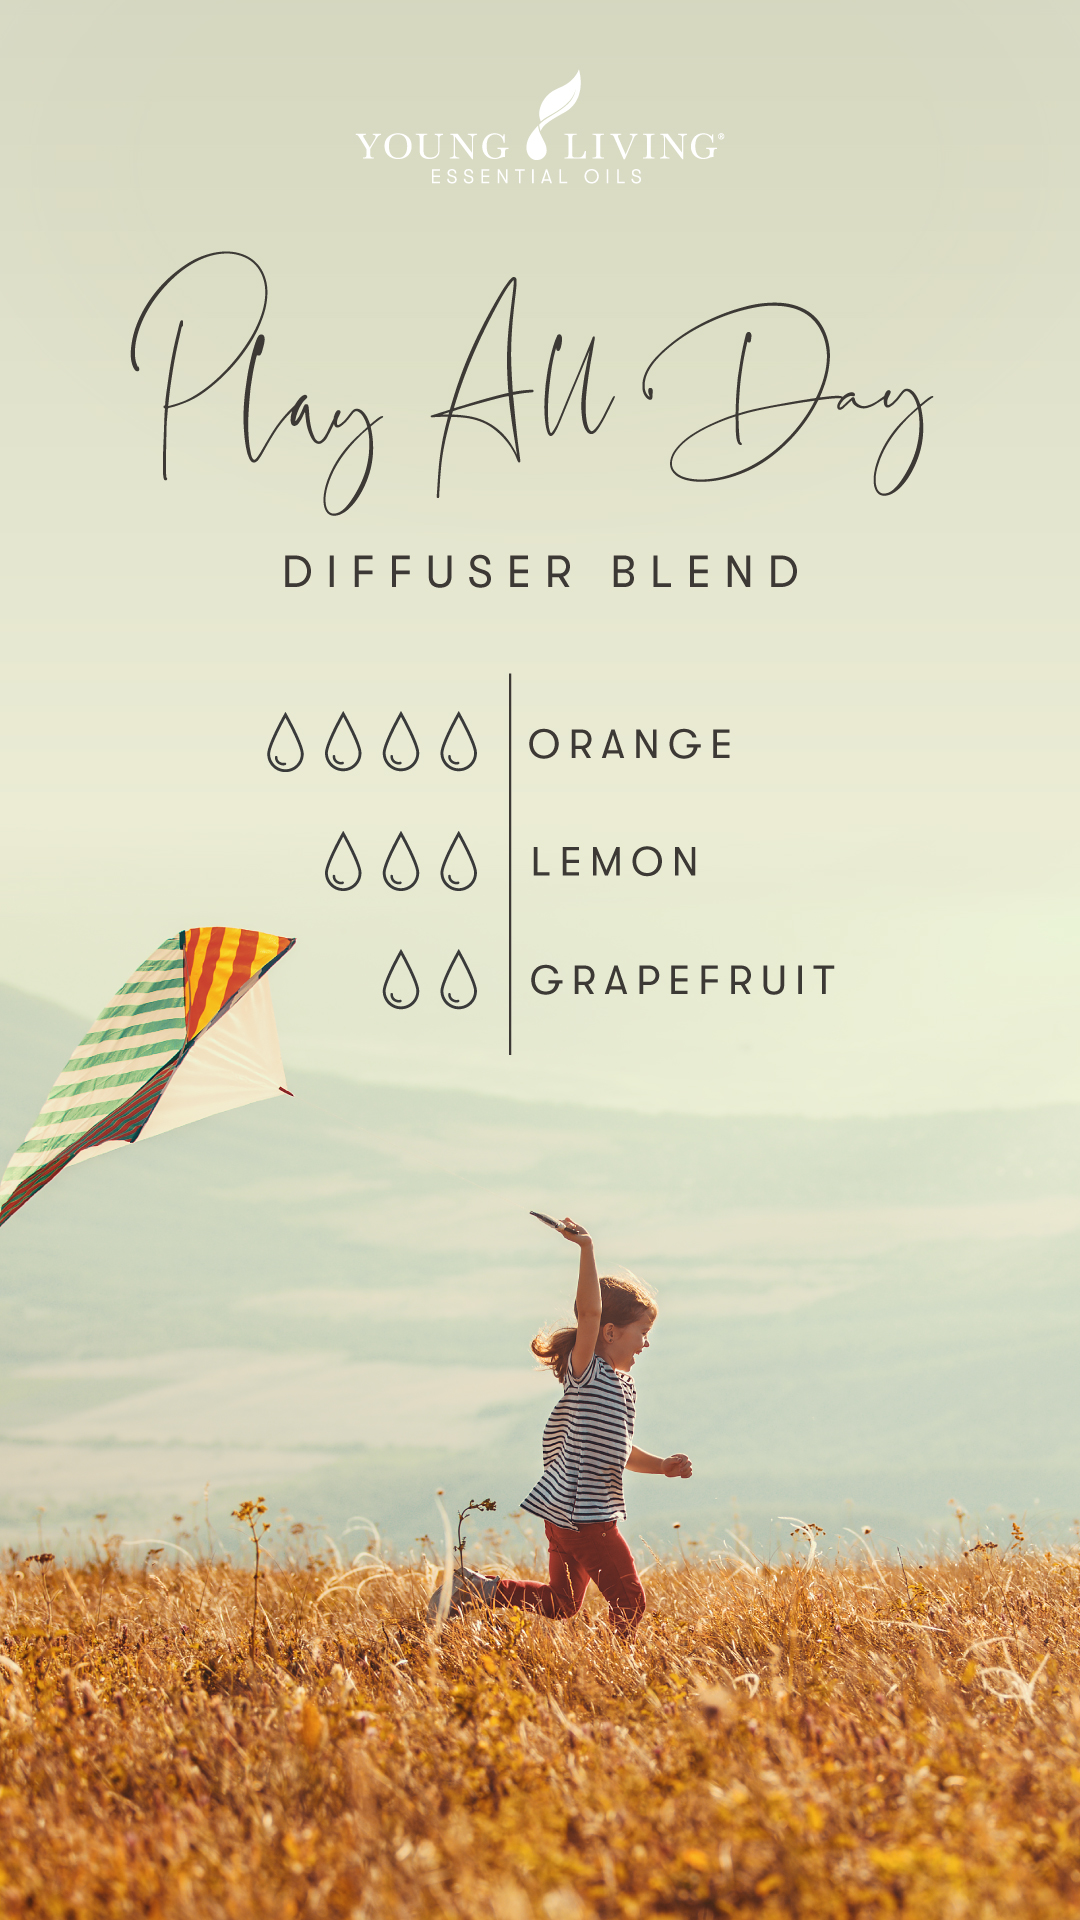 Play All Day diffuser blend - Young Living Essential Oils